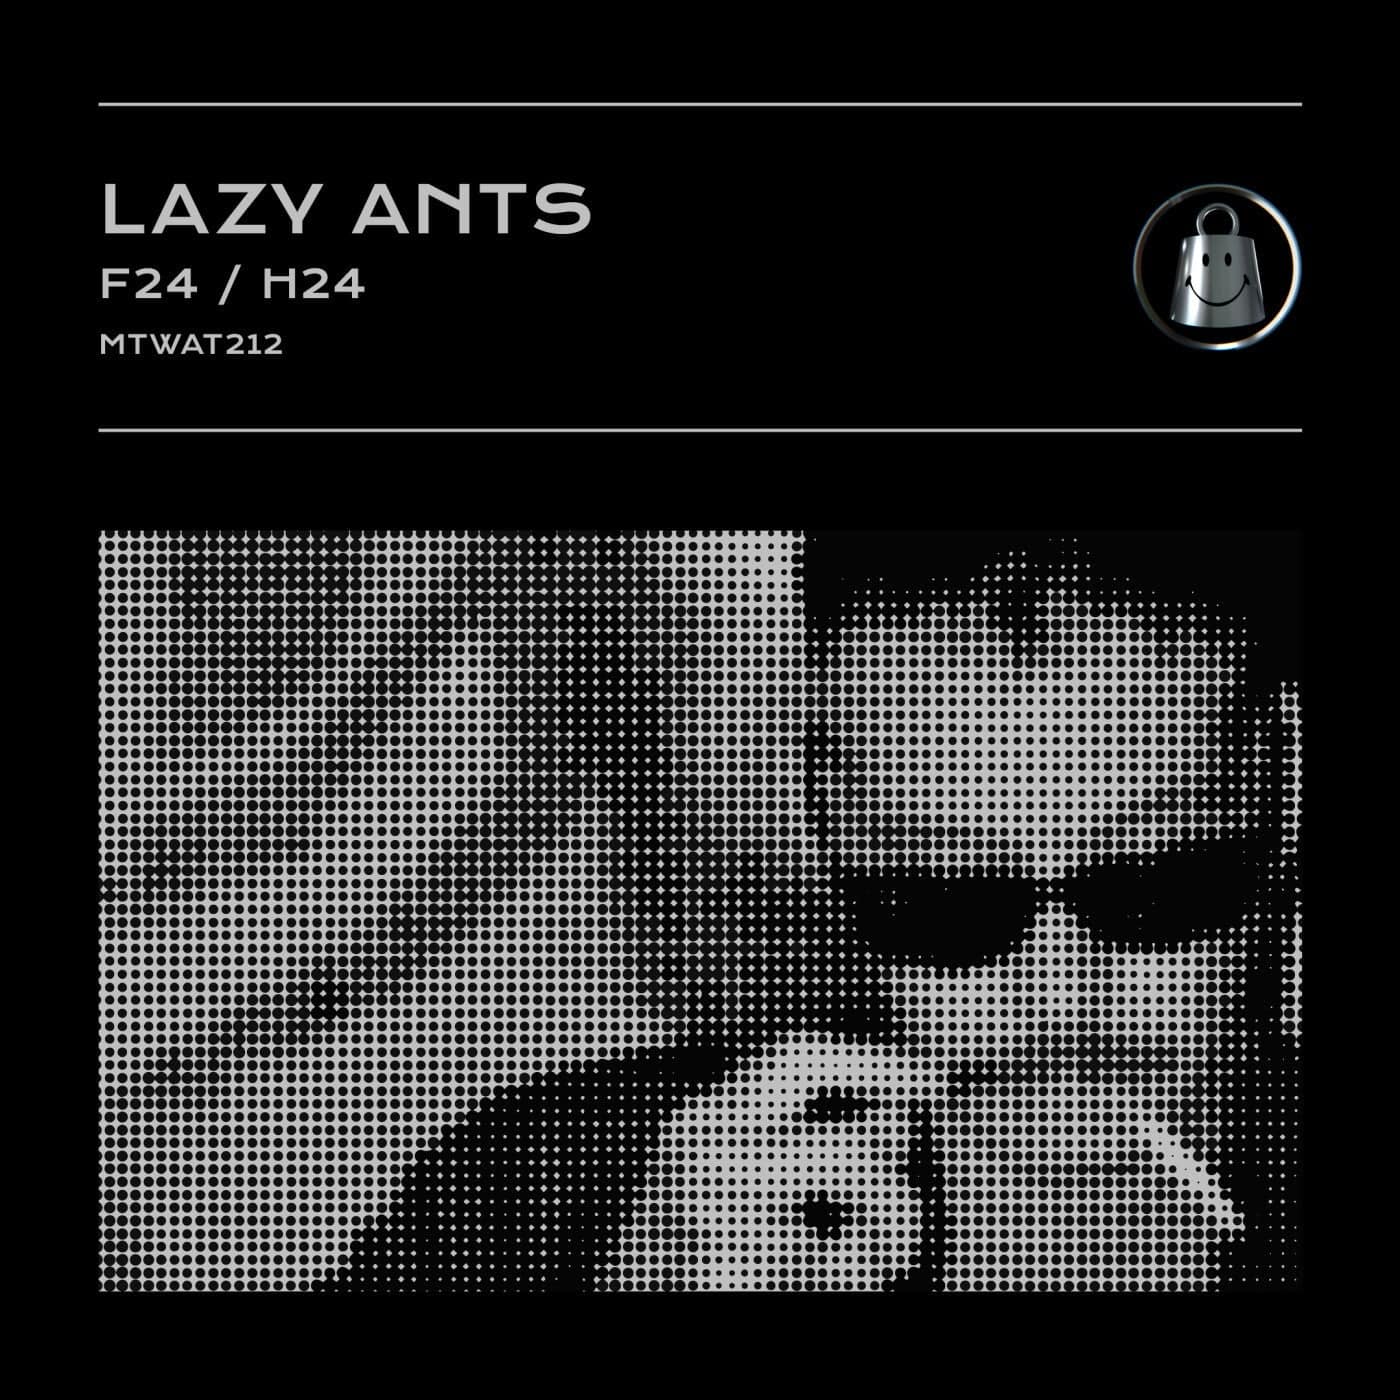 Download Lazy Ants - F24 / H24 on Electrobuzz